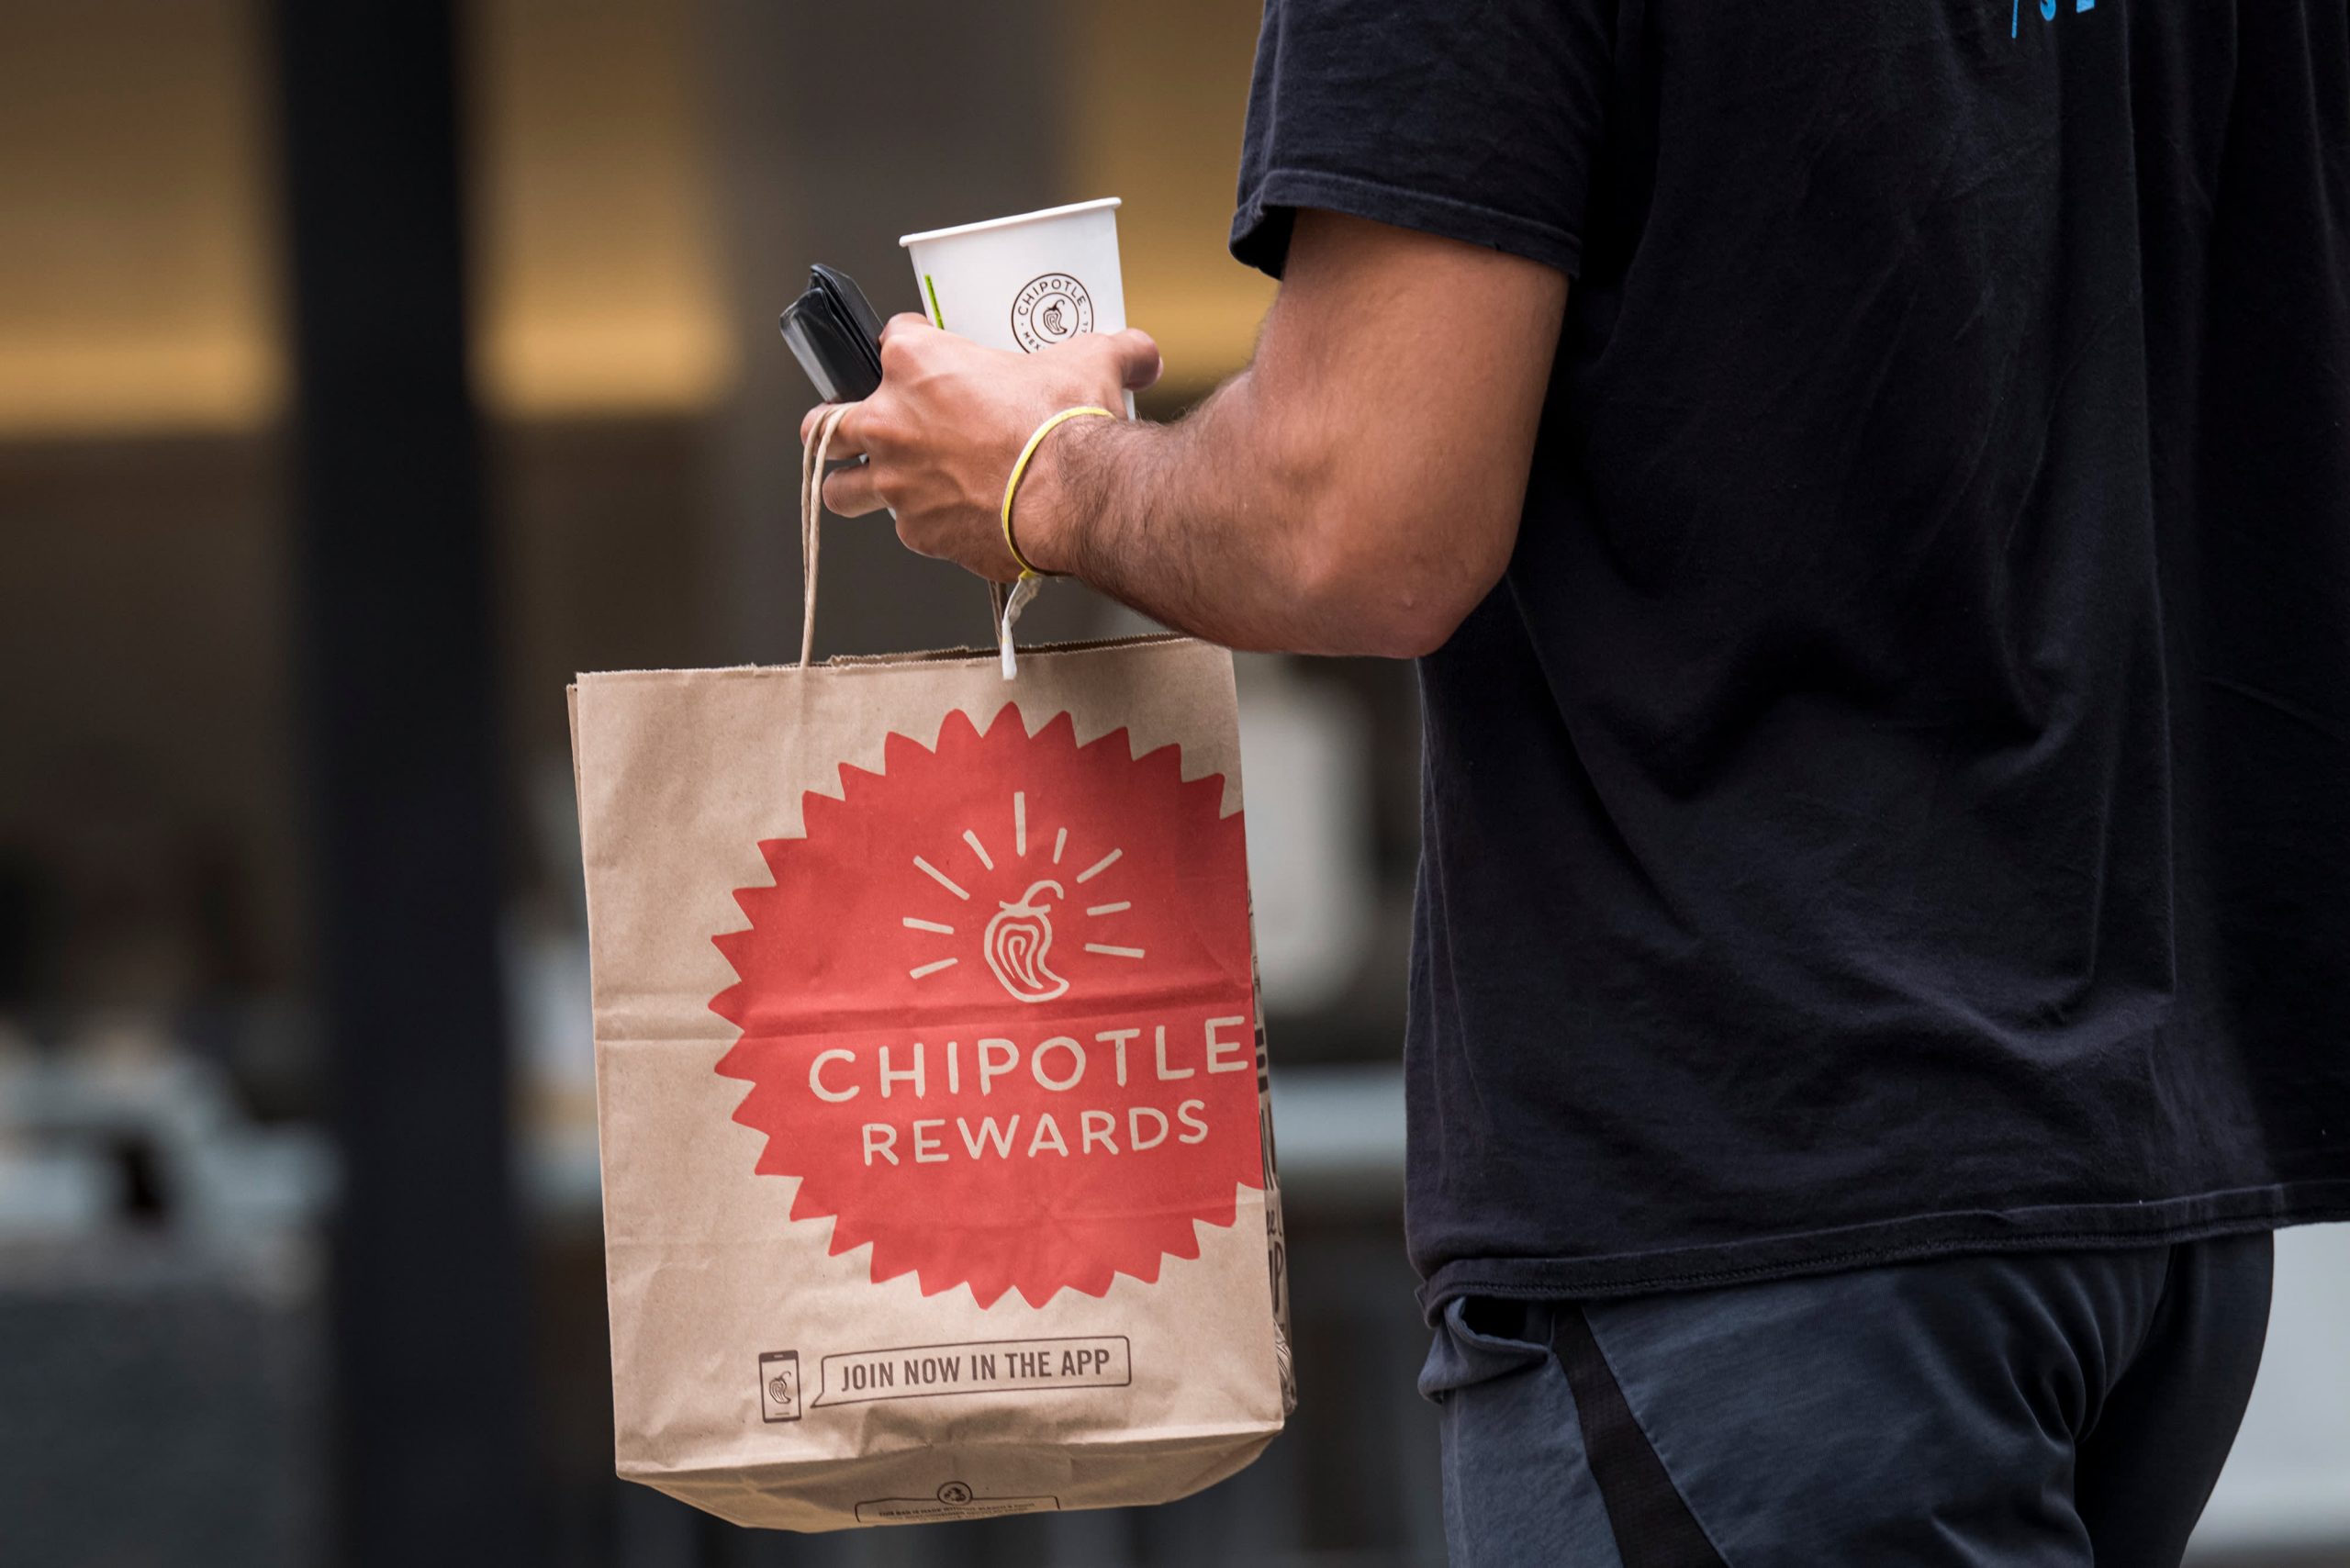 Jim Cramer reacts to Chipotle big earnings beat: 'Chipotle delivered'